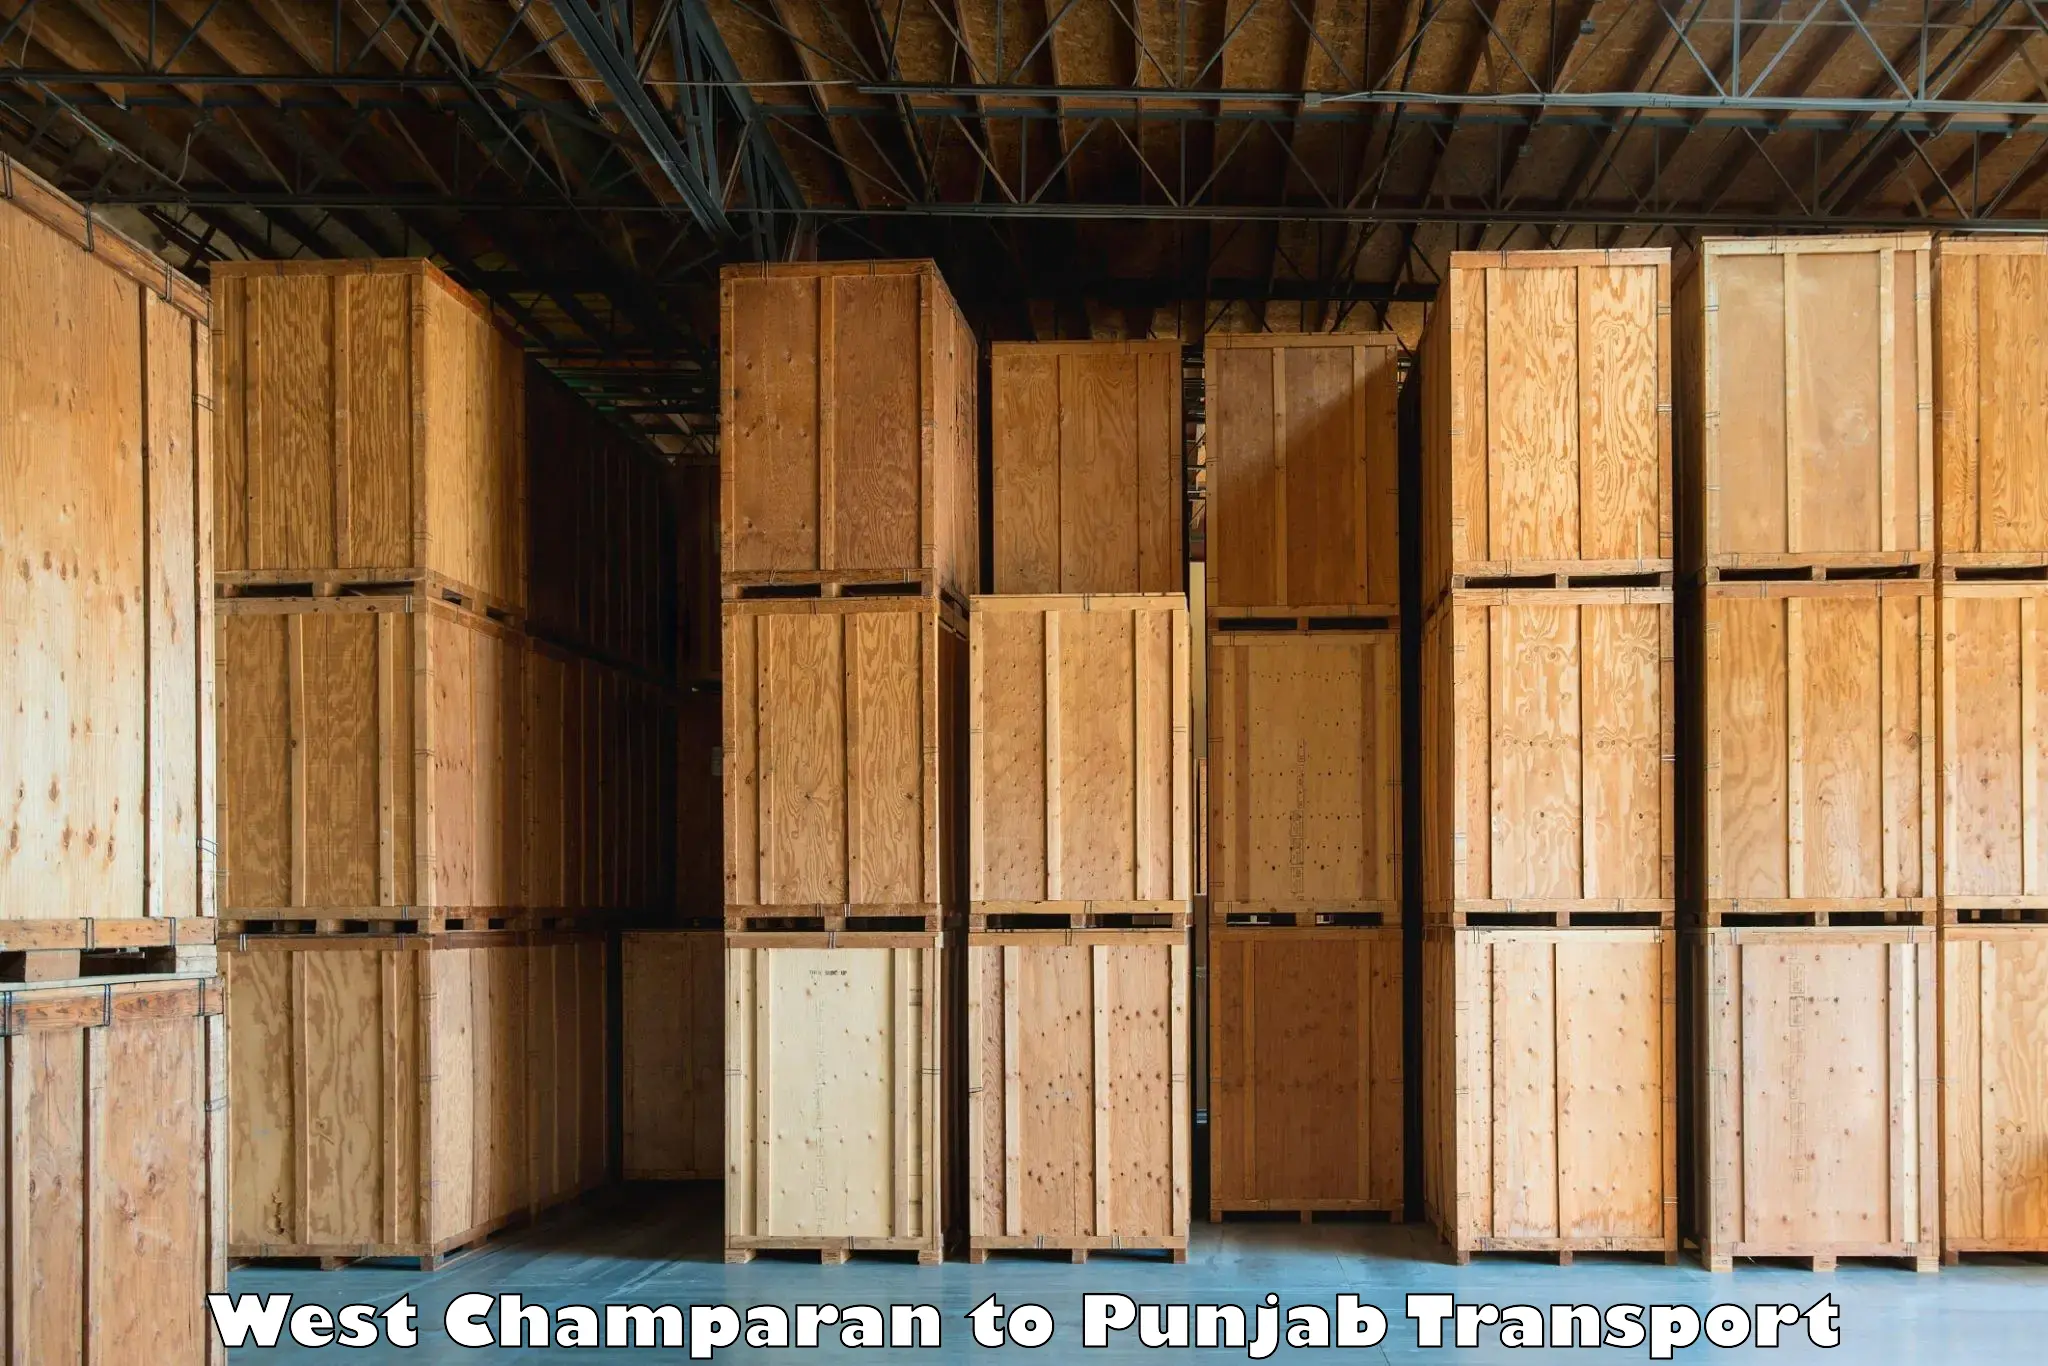 Container transport service West Champaran to Kotkapura